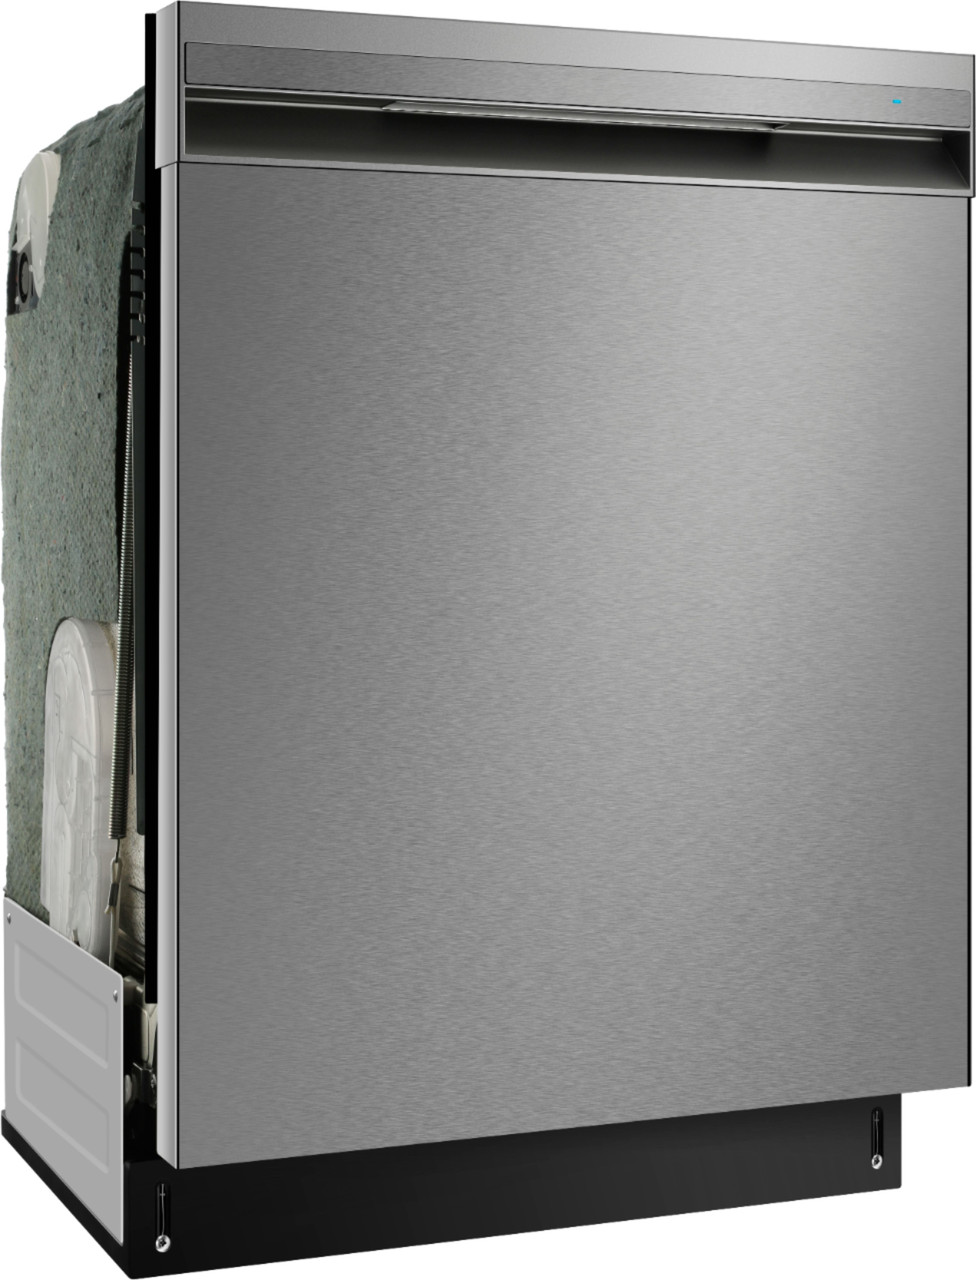 Insignia™ - Top Control Built-In Dishwasher with Recessed Handle – Stainless Steel - Stainless steel